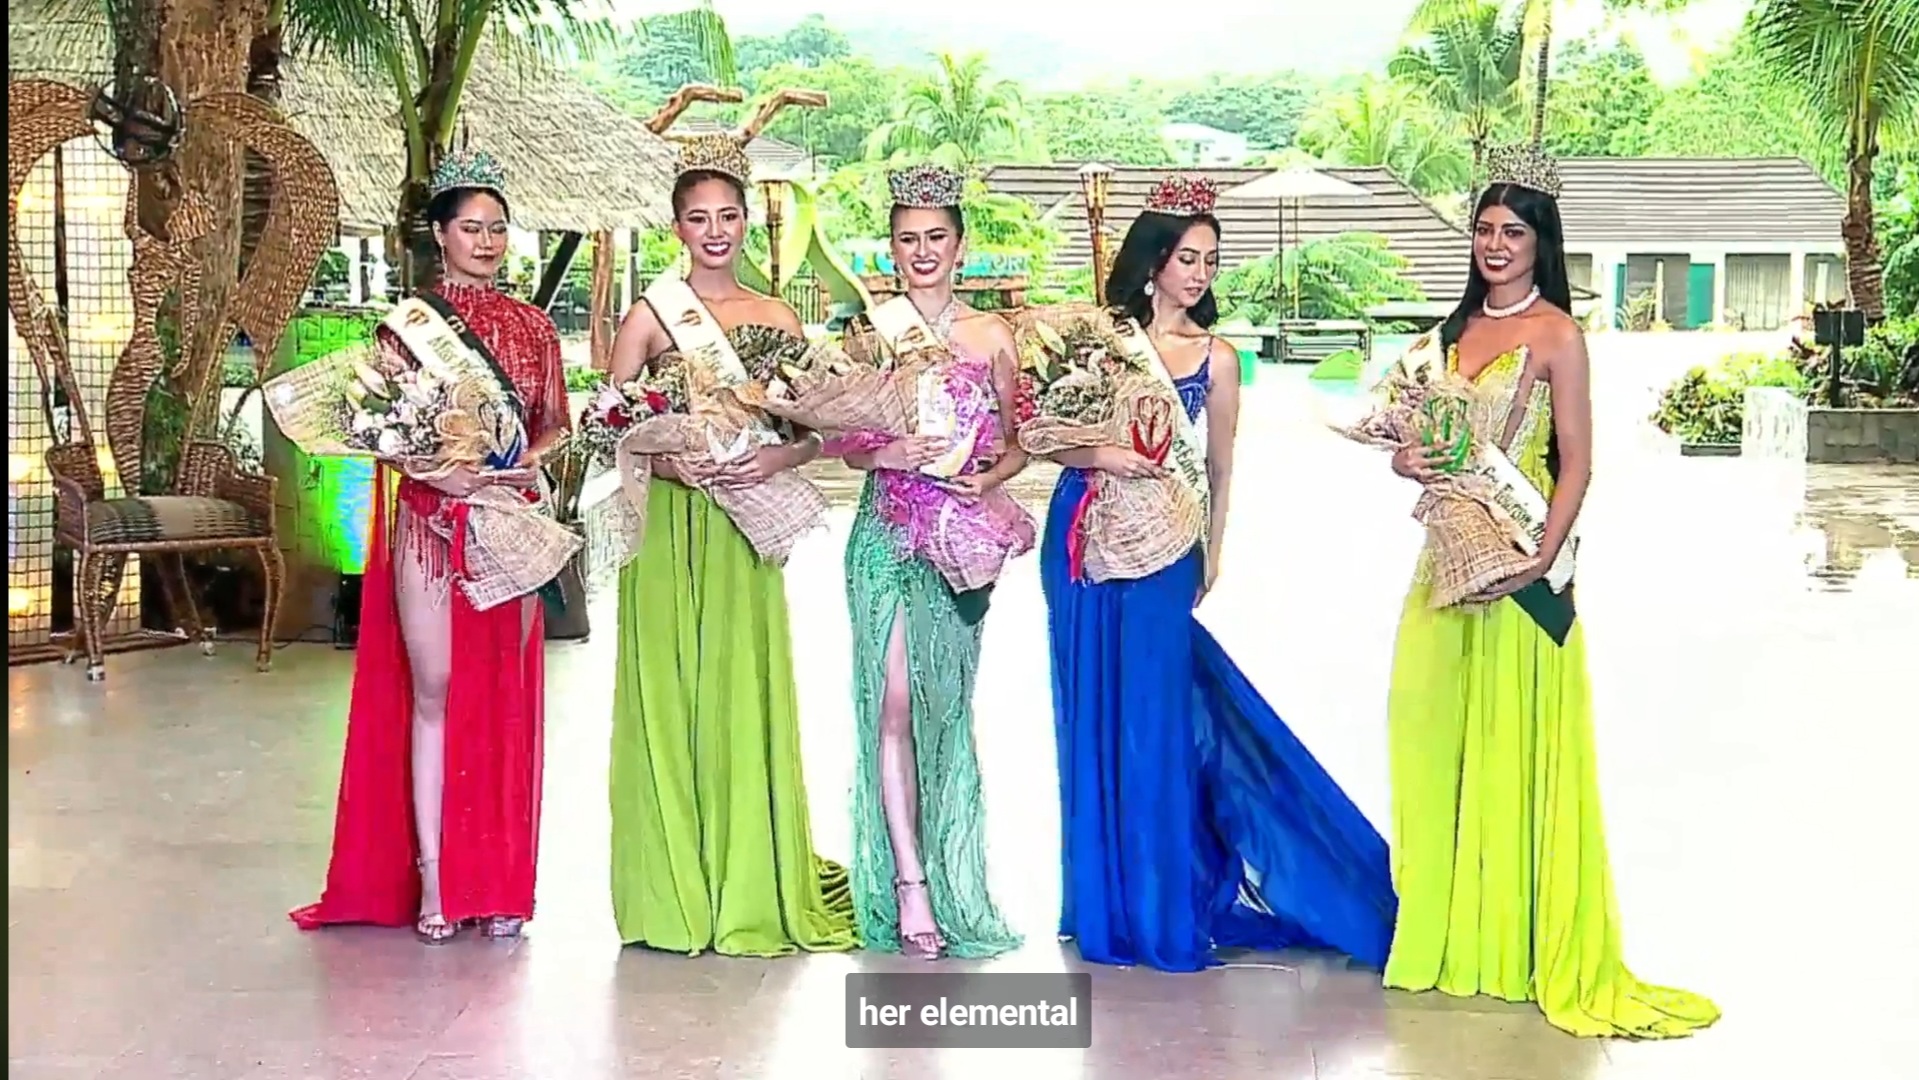 Miss Philippines Earth Jenny Ramp (center) beams with her ‘elemental queens’ (from left) Angeline Mae Santos, Jimema Tempra, Erika Vina Tan, and Nice Lampad./MISS PHILIPPINES EARTH FACEBOOK LIVE SCREENSHOT